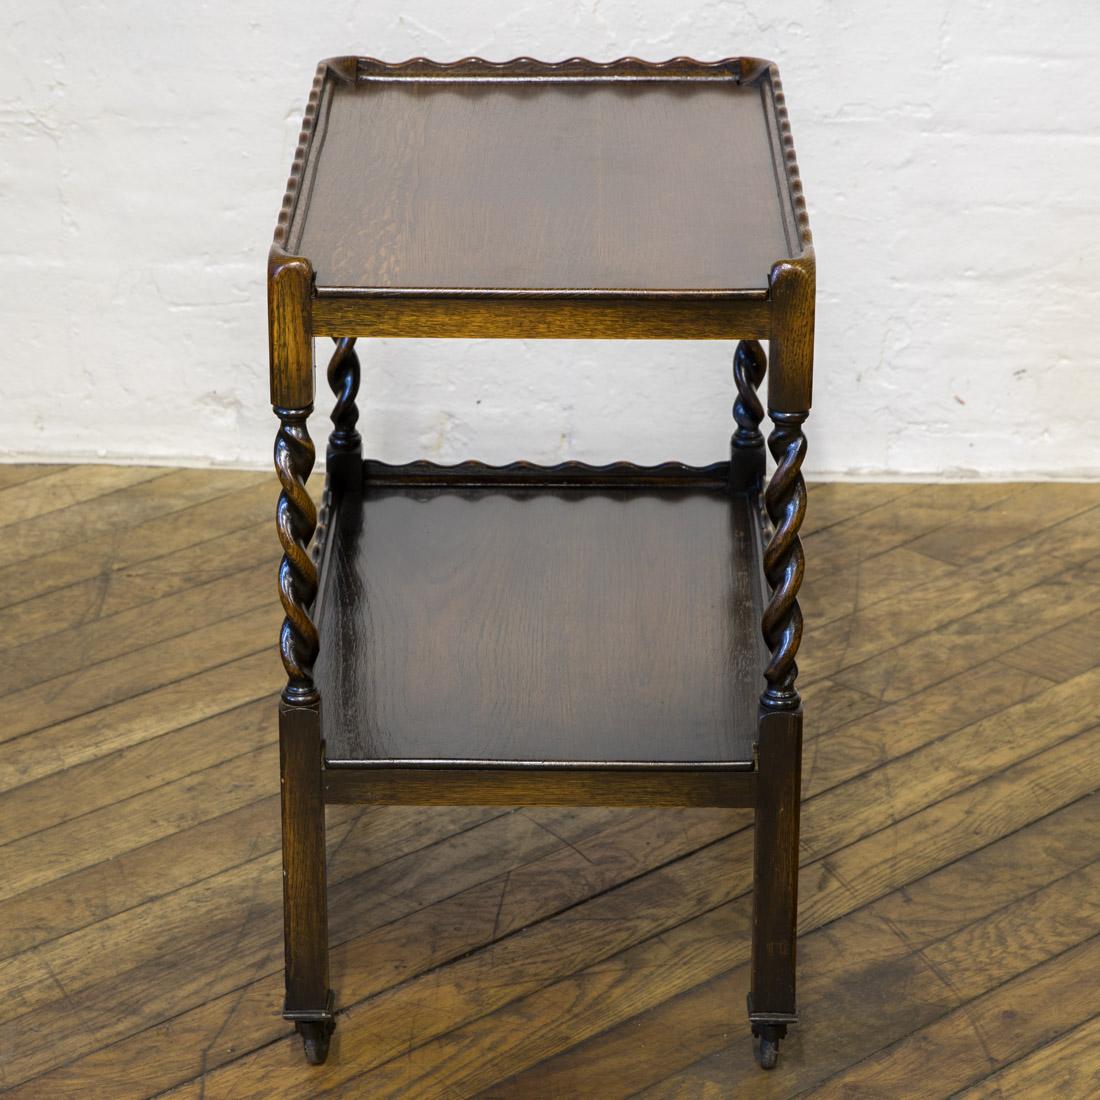 A lovely solid oak tea trolley with wonderful pie crust edges to its top and lower tier. Complimented with its barley twist legs and sat on its original castors. In excellent condition and ready to use and enjoy.
  